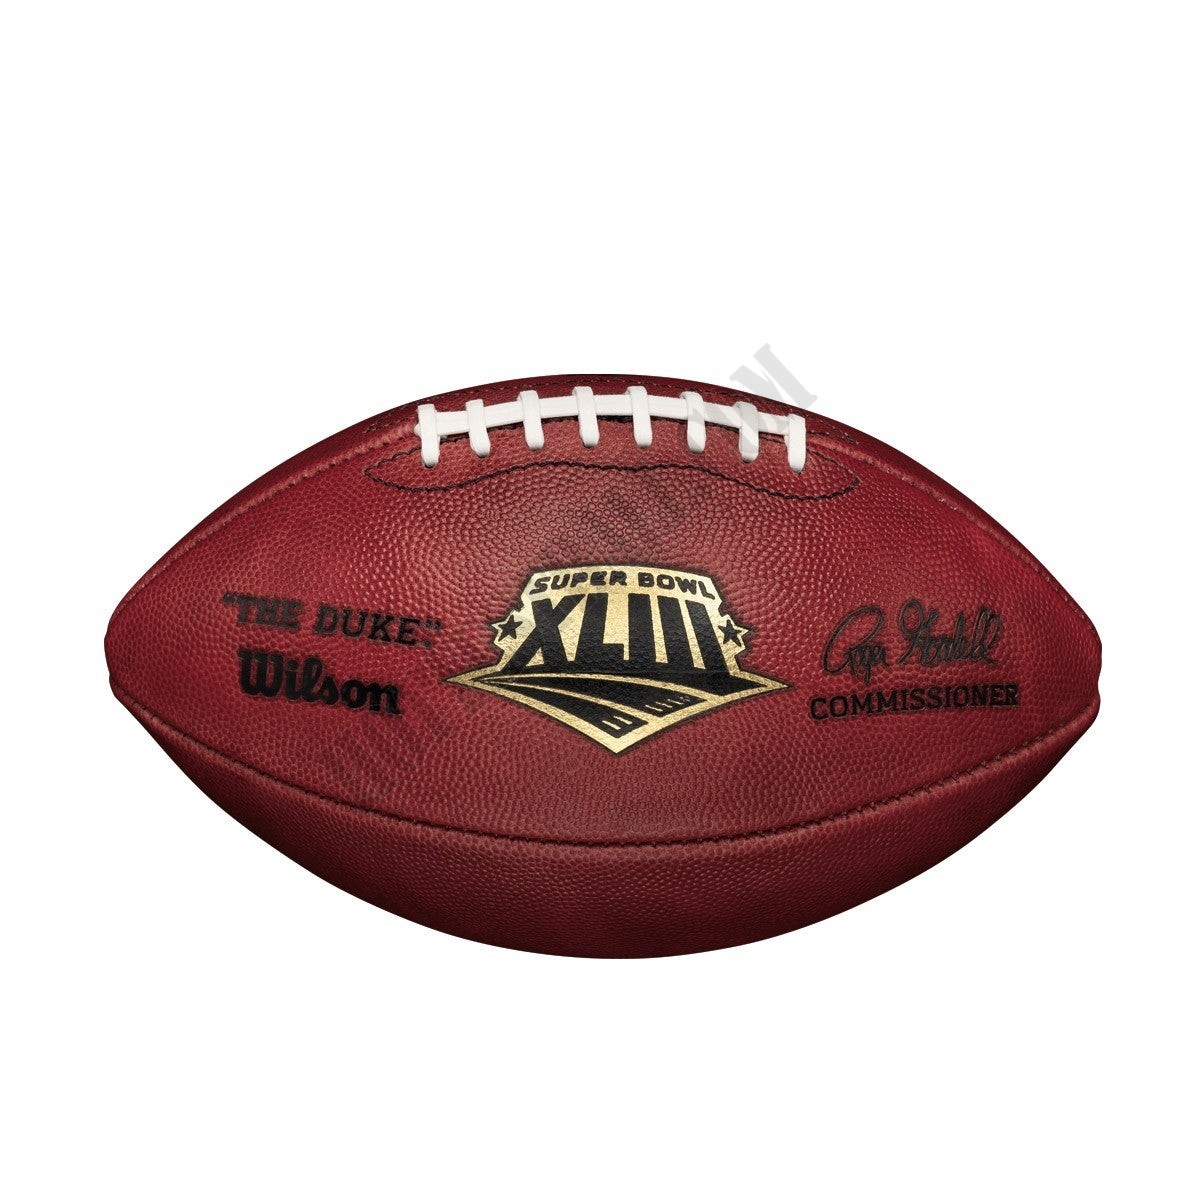 Super Bowl XIII Game Football - Pittsburgh Steelers ● Wilson Promotions - -0